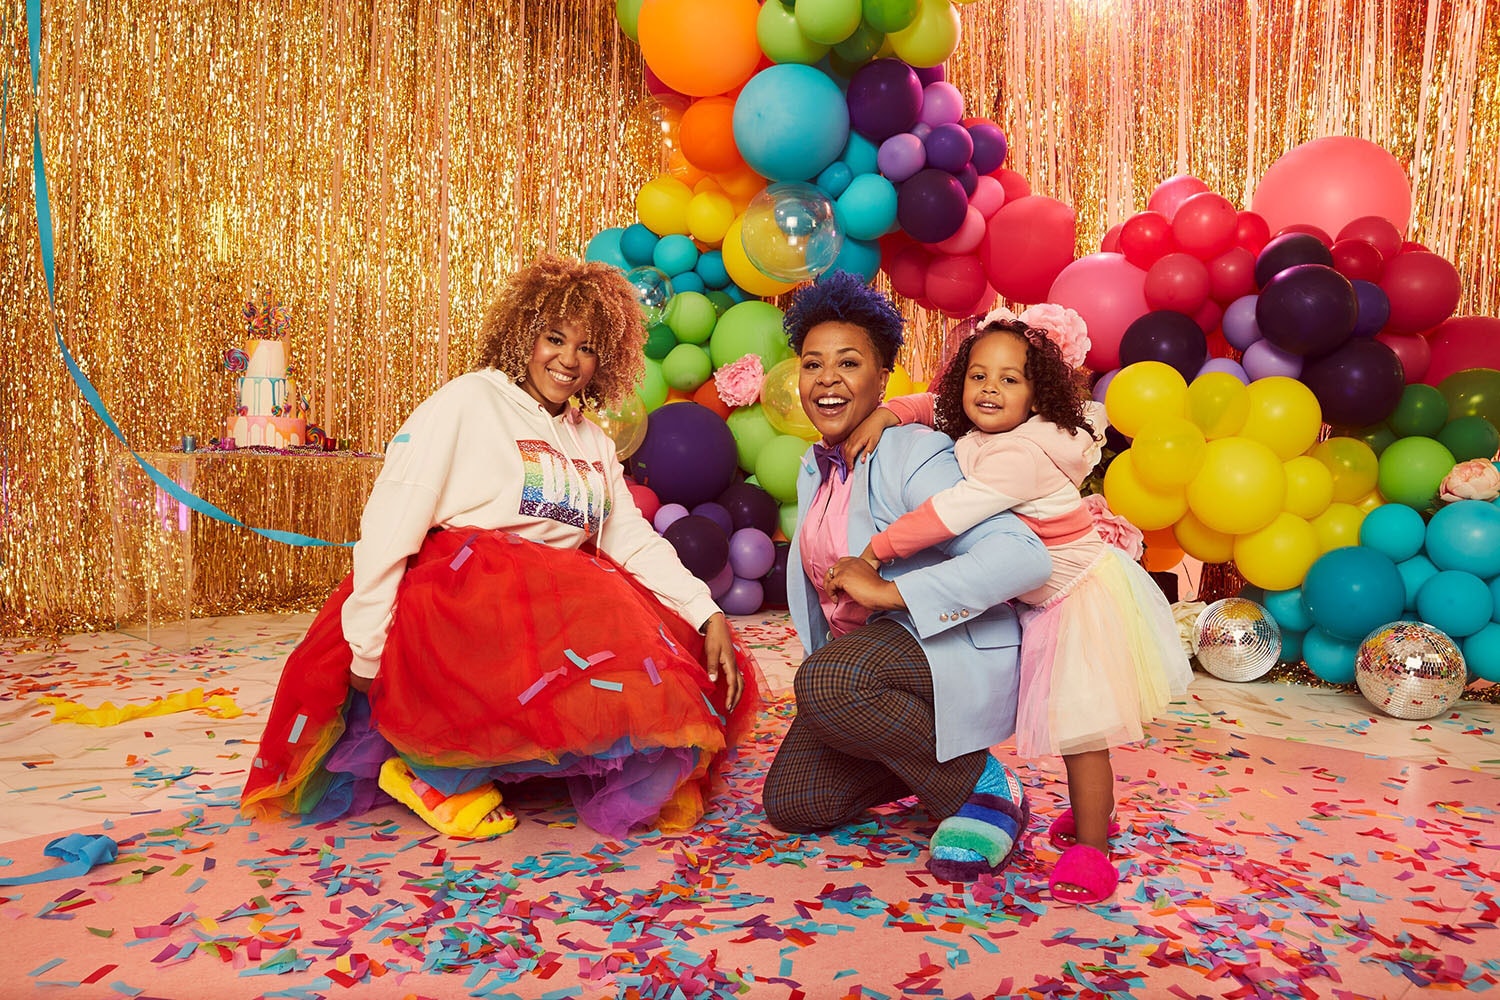 ugg reveals all-gender capsule collection to celebrate pride month 